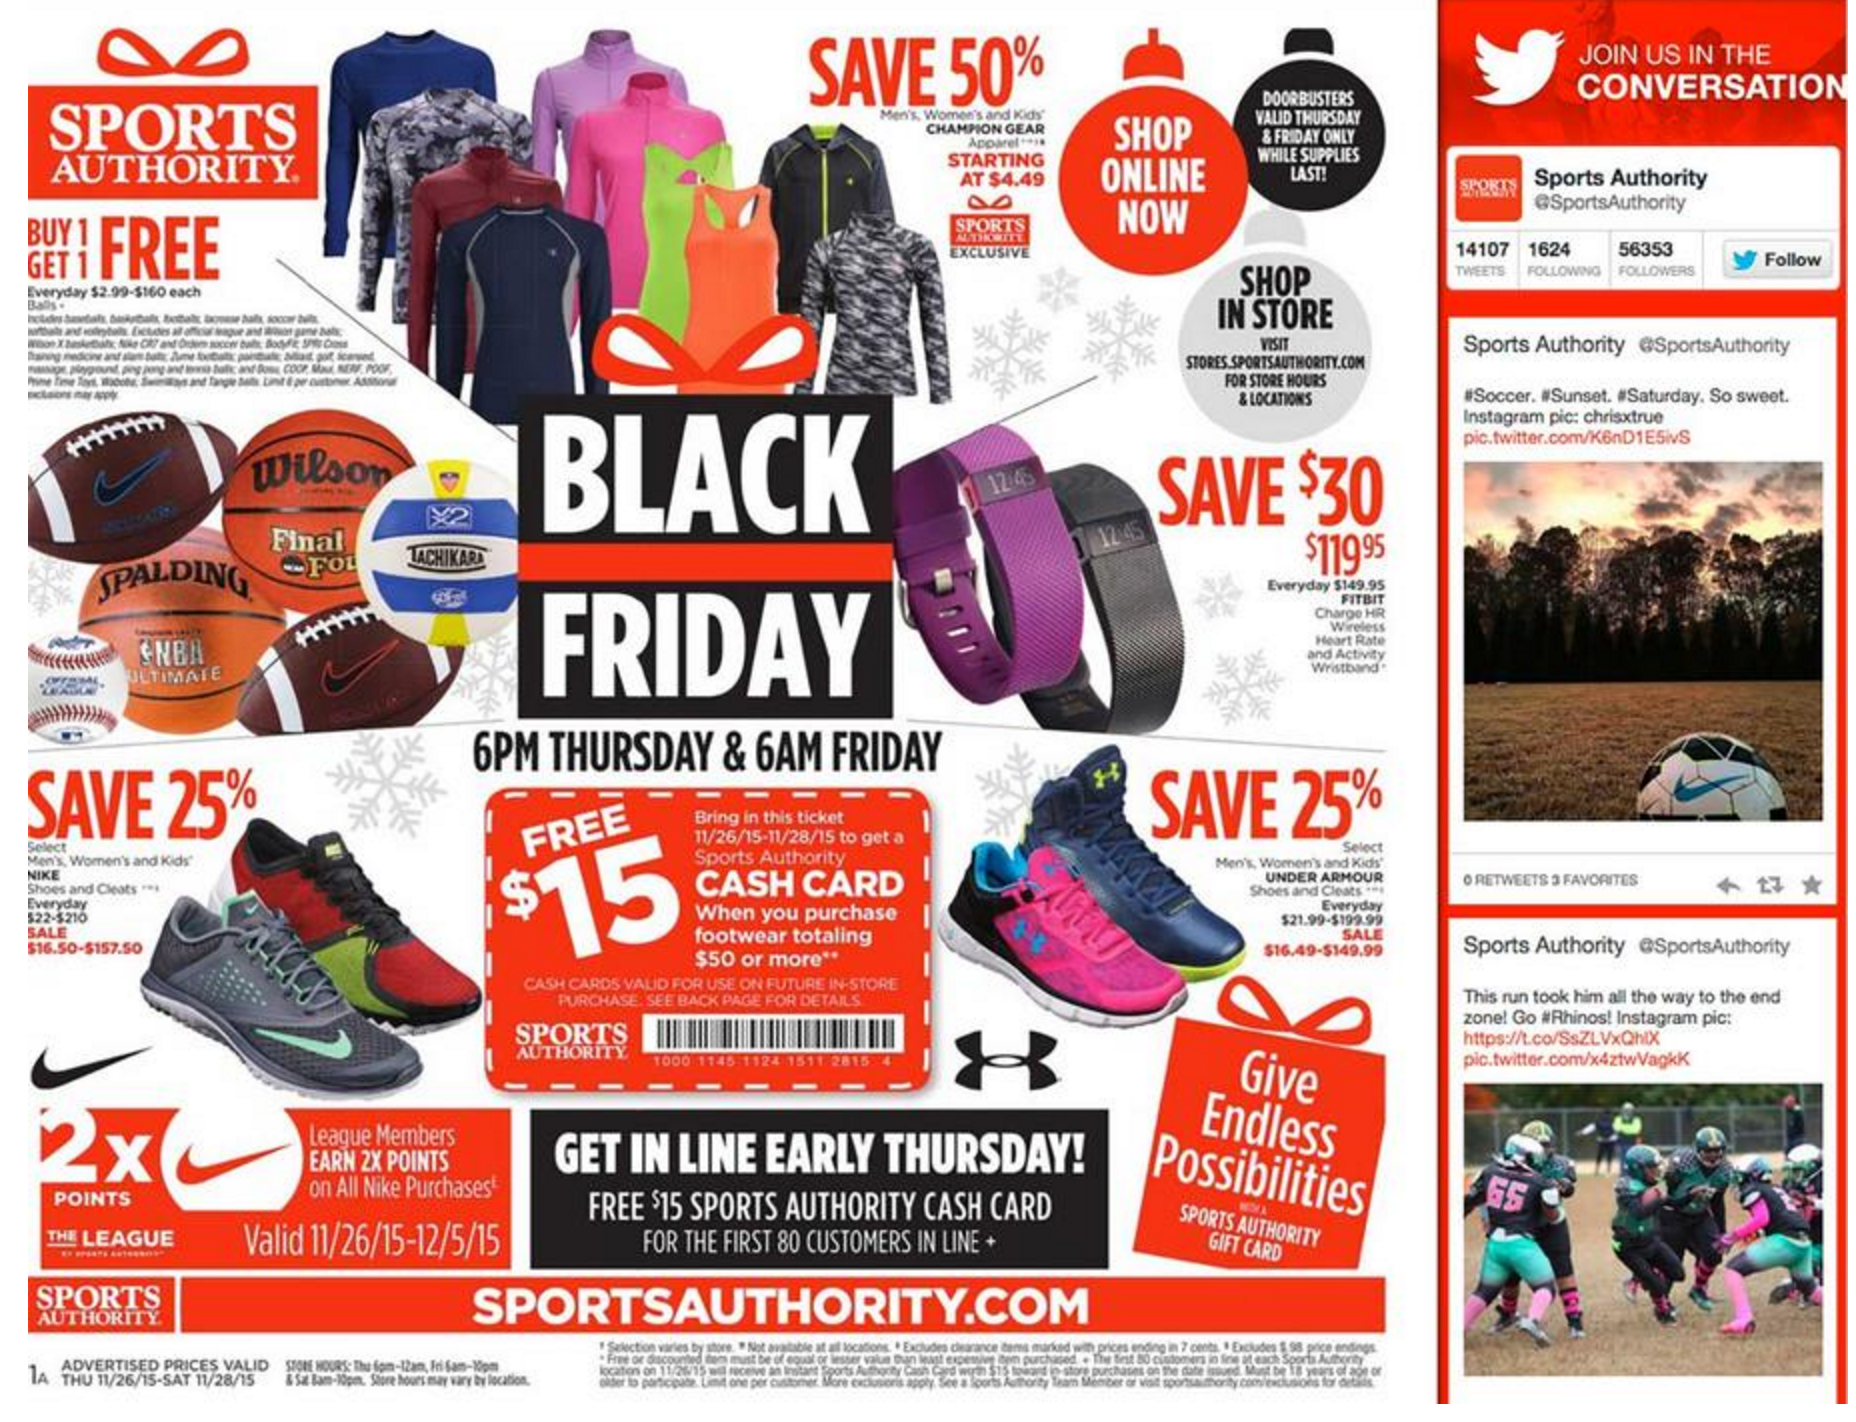 Sports Authority Black Friday gift cards w/ footwear, FitBit HR $120, more